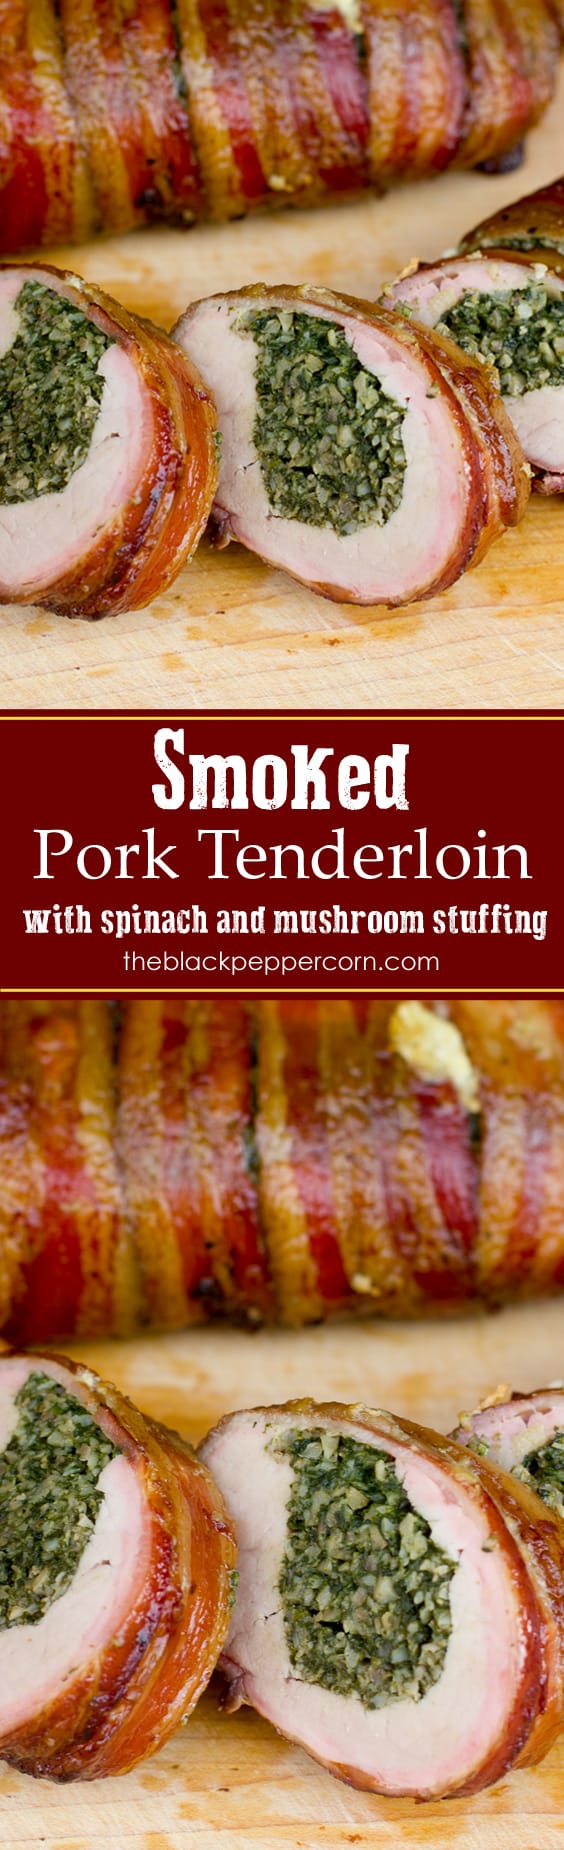 Smoked Pork Tenderloin Stuffed with Spinach and Mushrooms